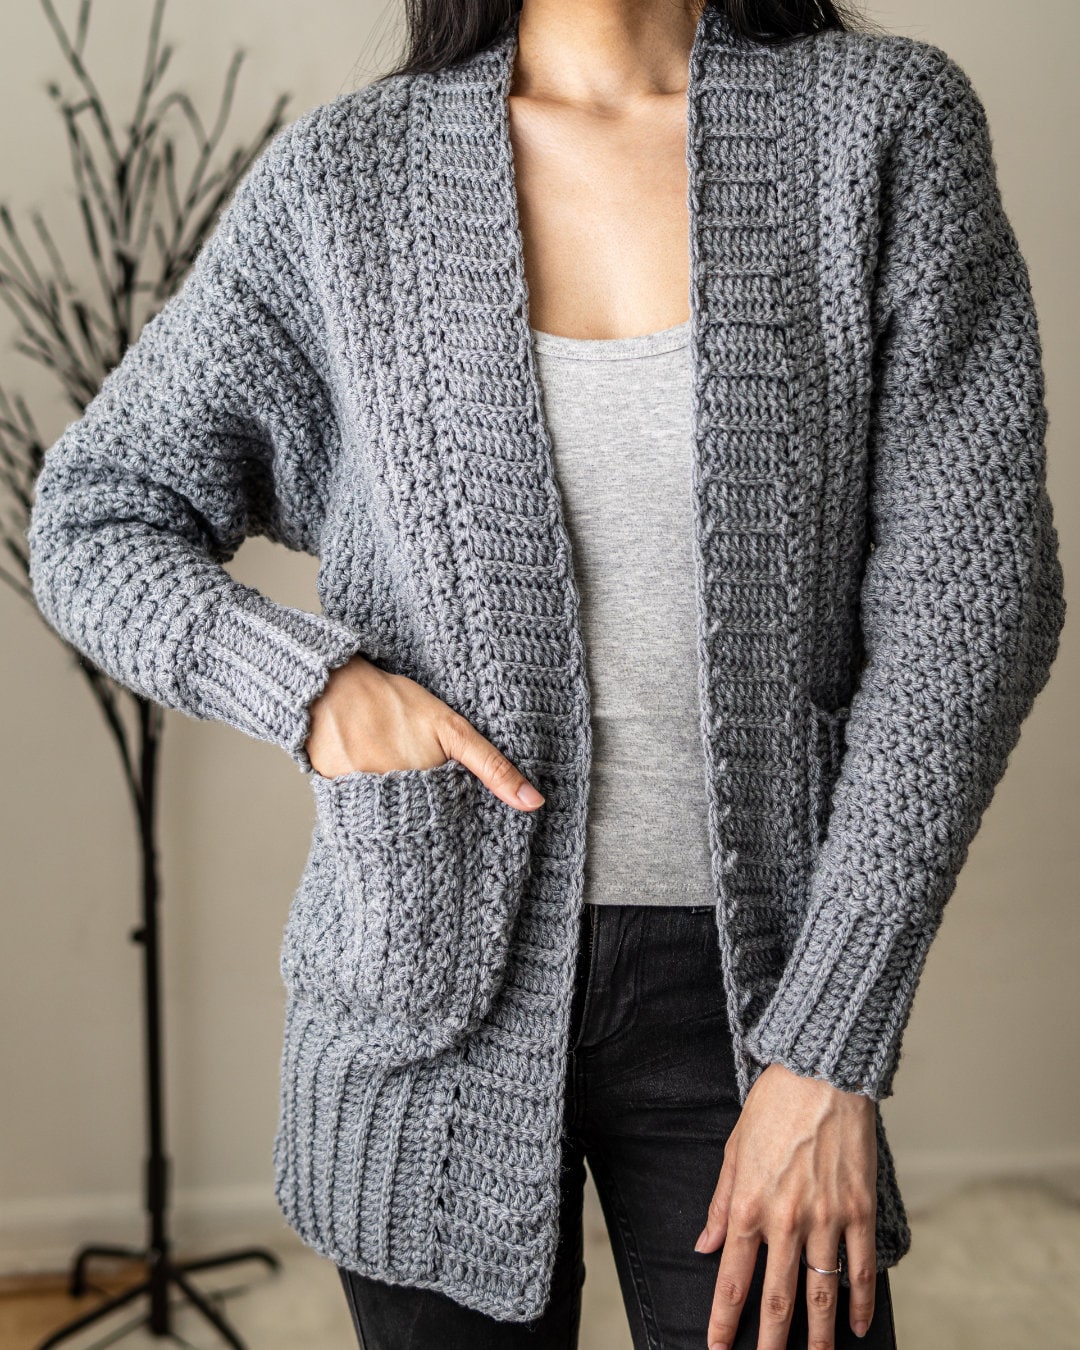 Crochet Pattern Batwing Cardigan With Pockets PDF Download - Etsy